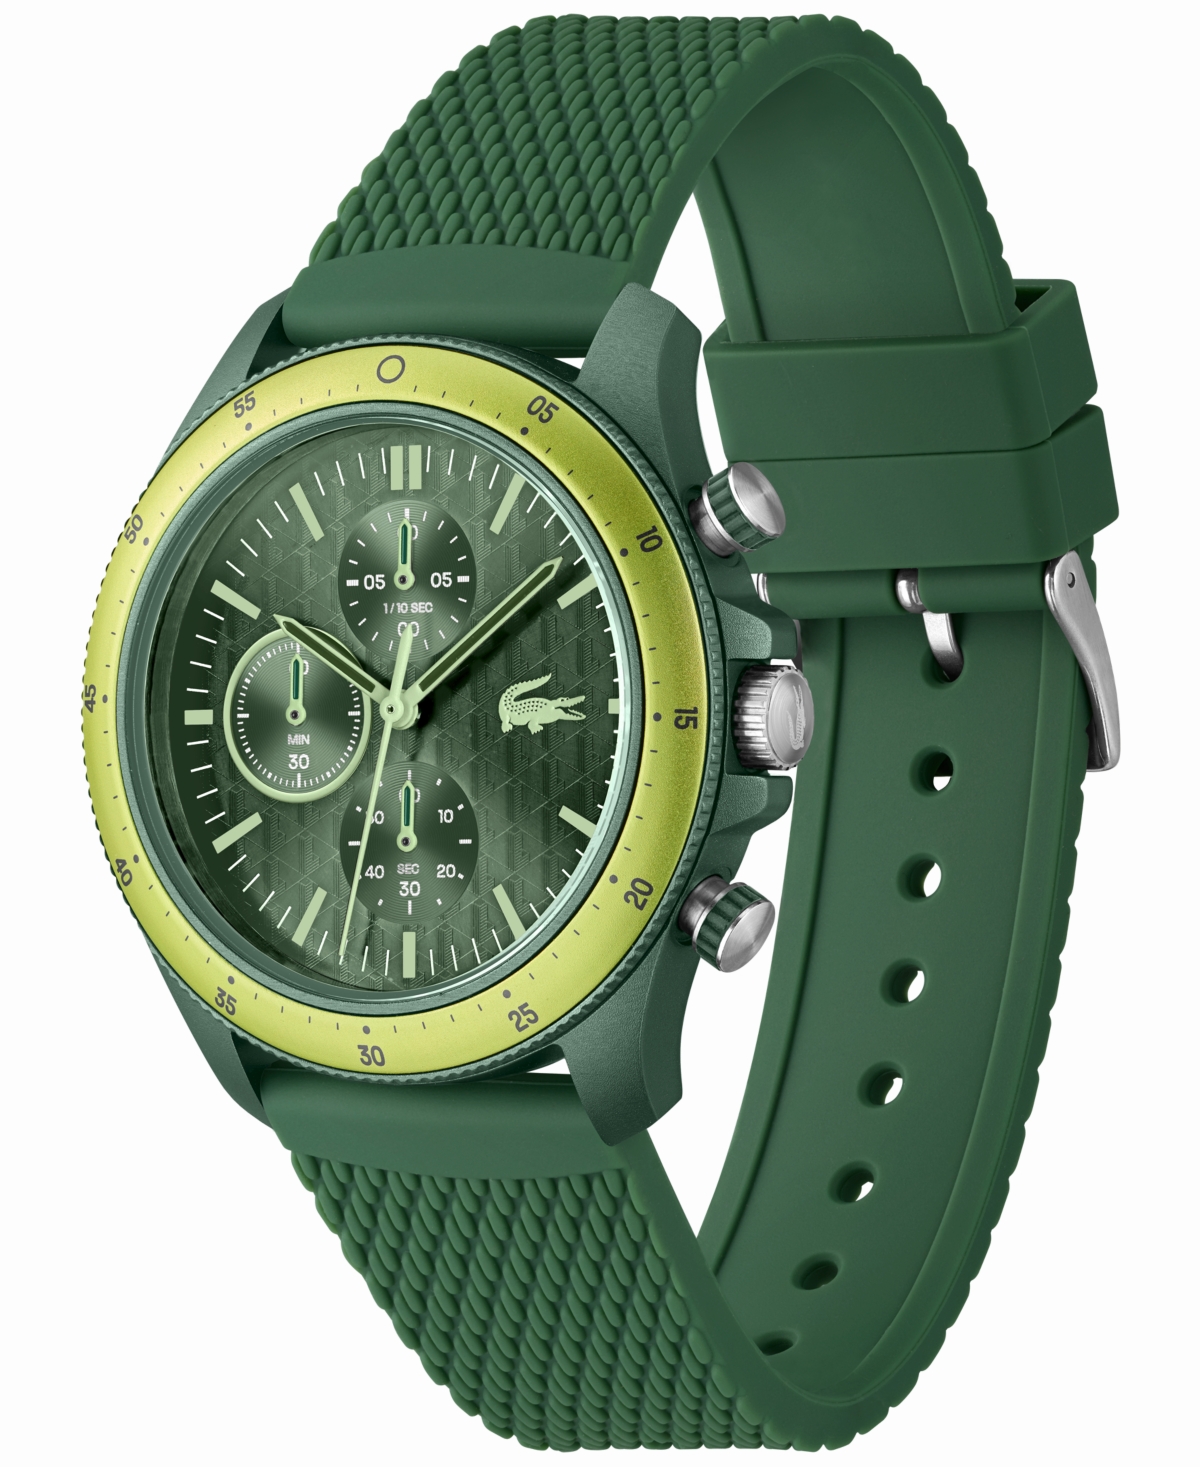 Shop Lacoste Men's Neoheritage Chronograph Green Silicone Strap Watch 42mm